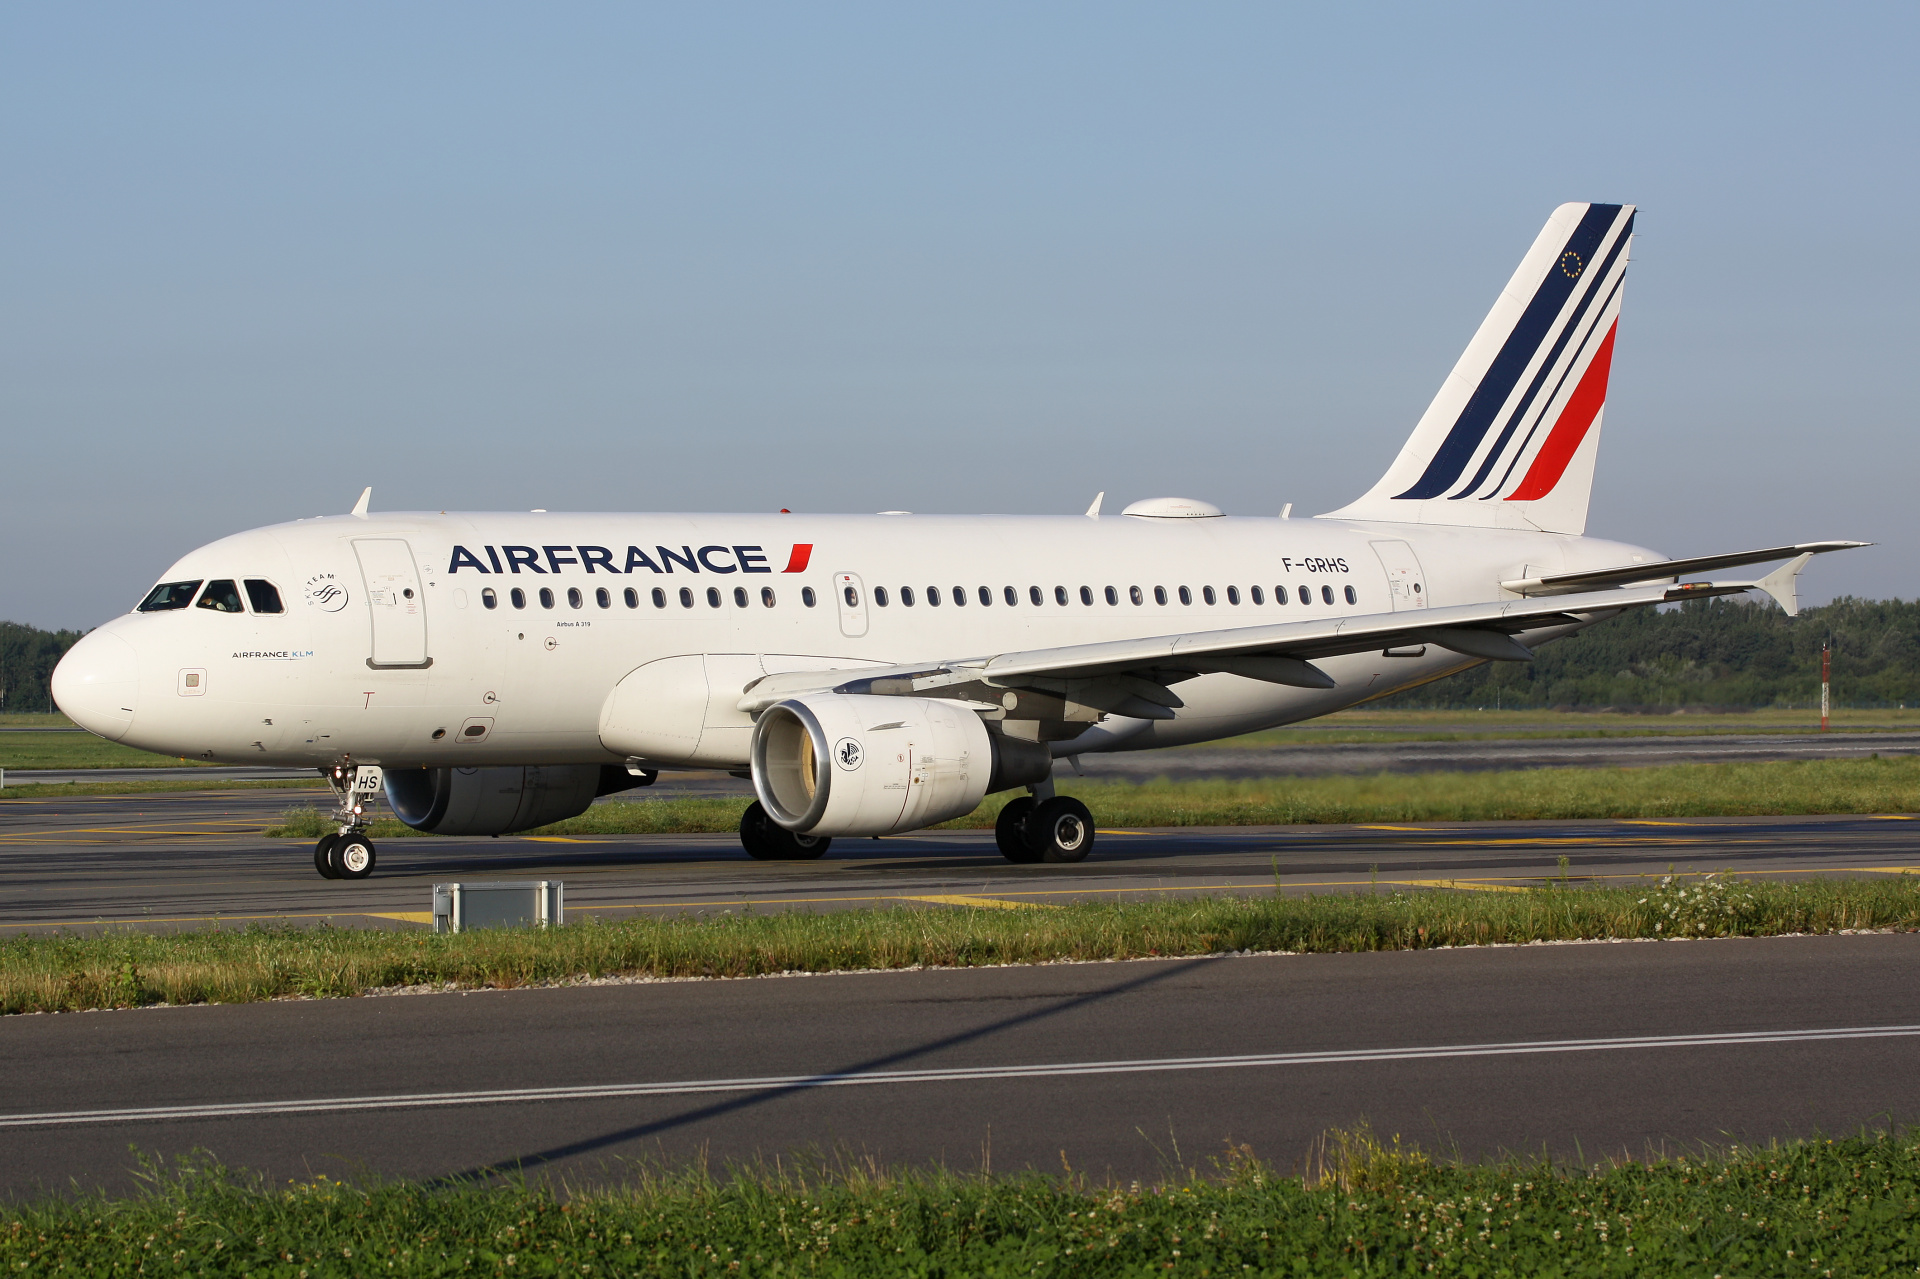 F-GRHS (Aircraft » EPWA Spotting » Airbus A319-100 » Air France)